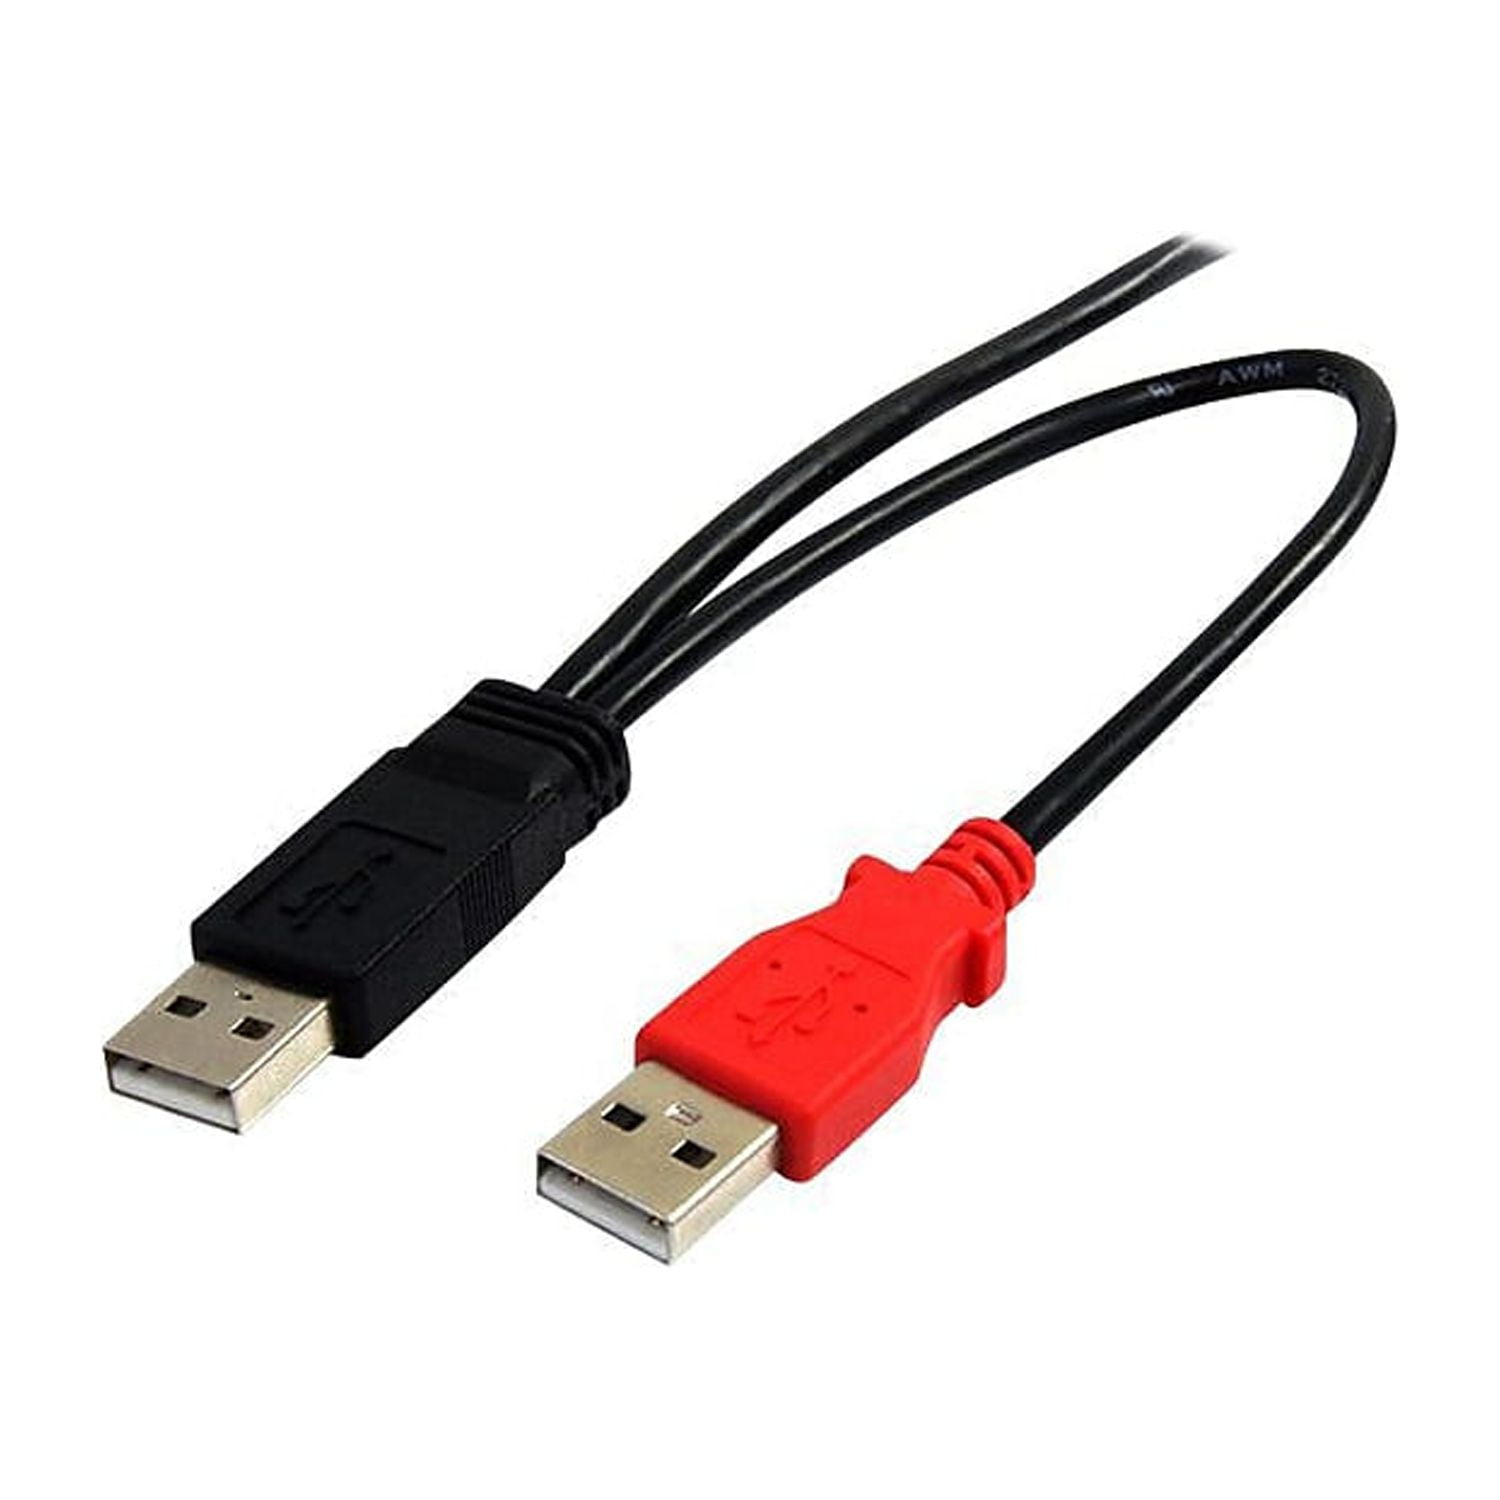 Dual USB 3.0 Type A to Micro-B USB Y Shape High Speed Cable for External  Hard Drives/Seagate/Toshiba/WD/Hitachi/Samsung/Wii-U/Note 3 (21 Inches) 